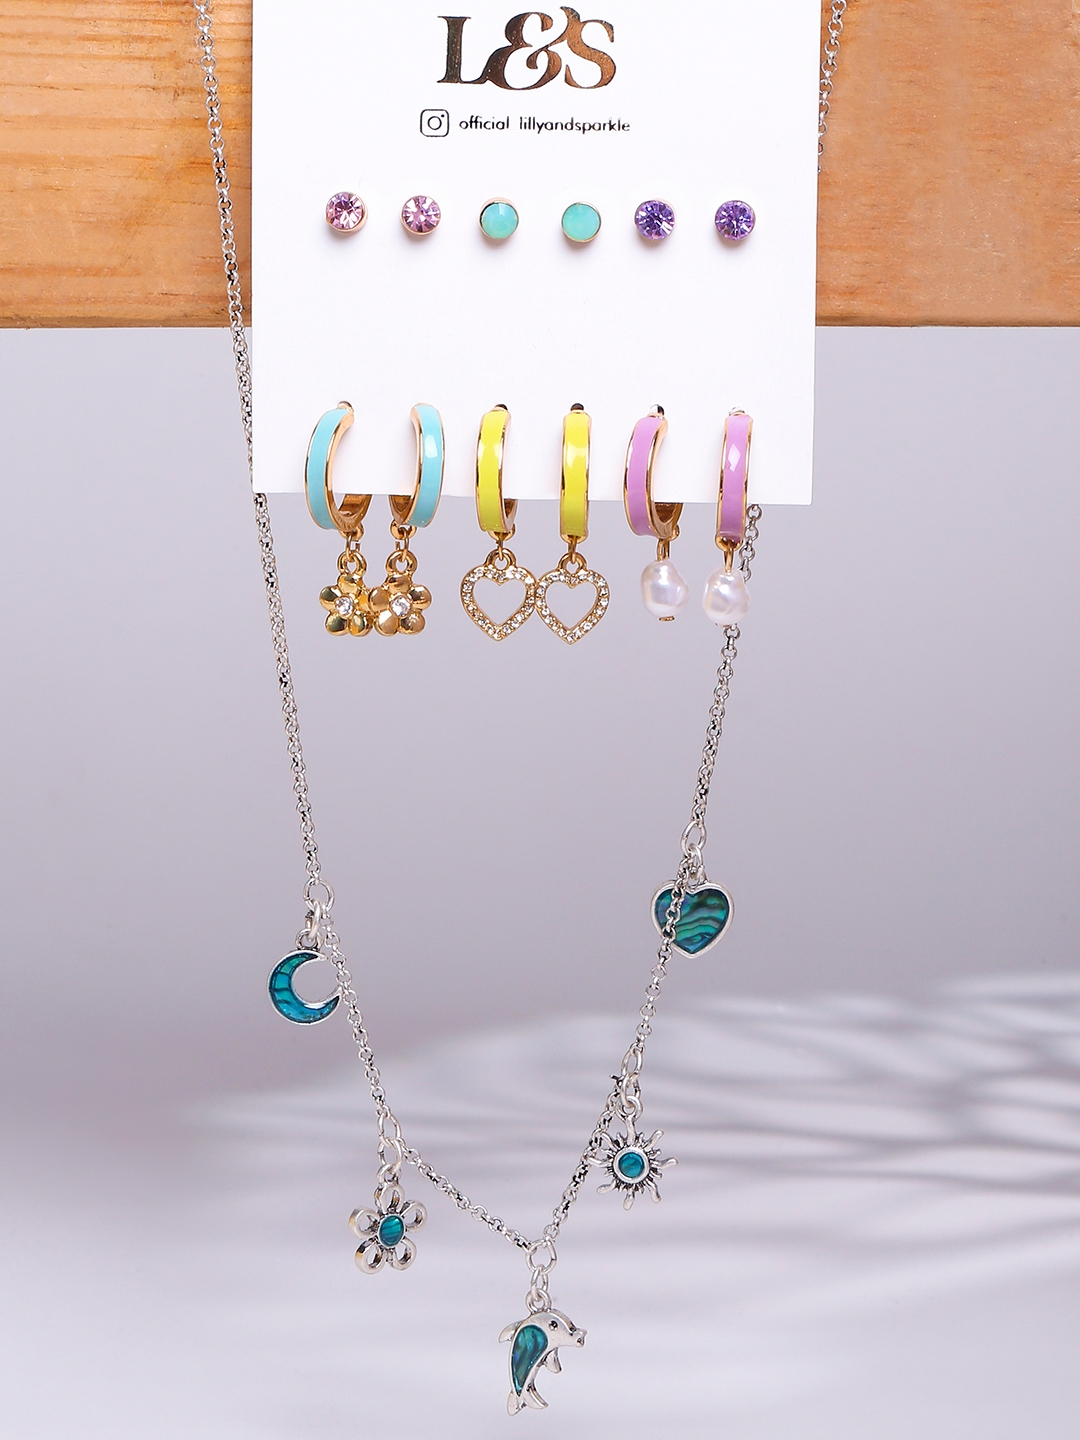 Lilly & sparkle | Lilly & Sparkle Combo Pack 3 Hoops&Stud Earring With Flower Pearl, Heart Charm&Blue Pendant Necklace